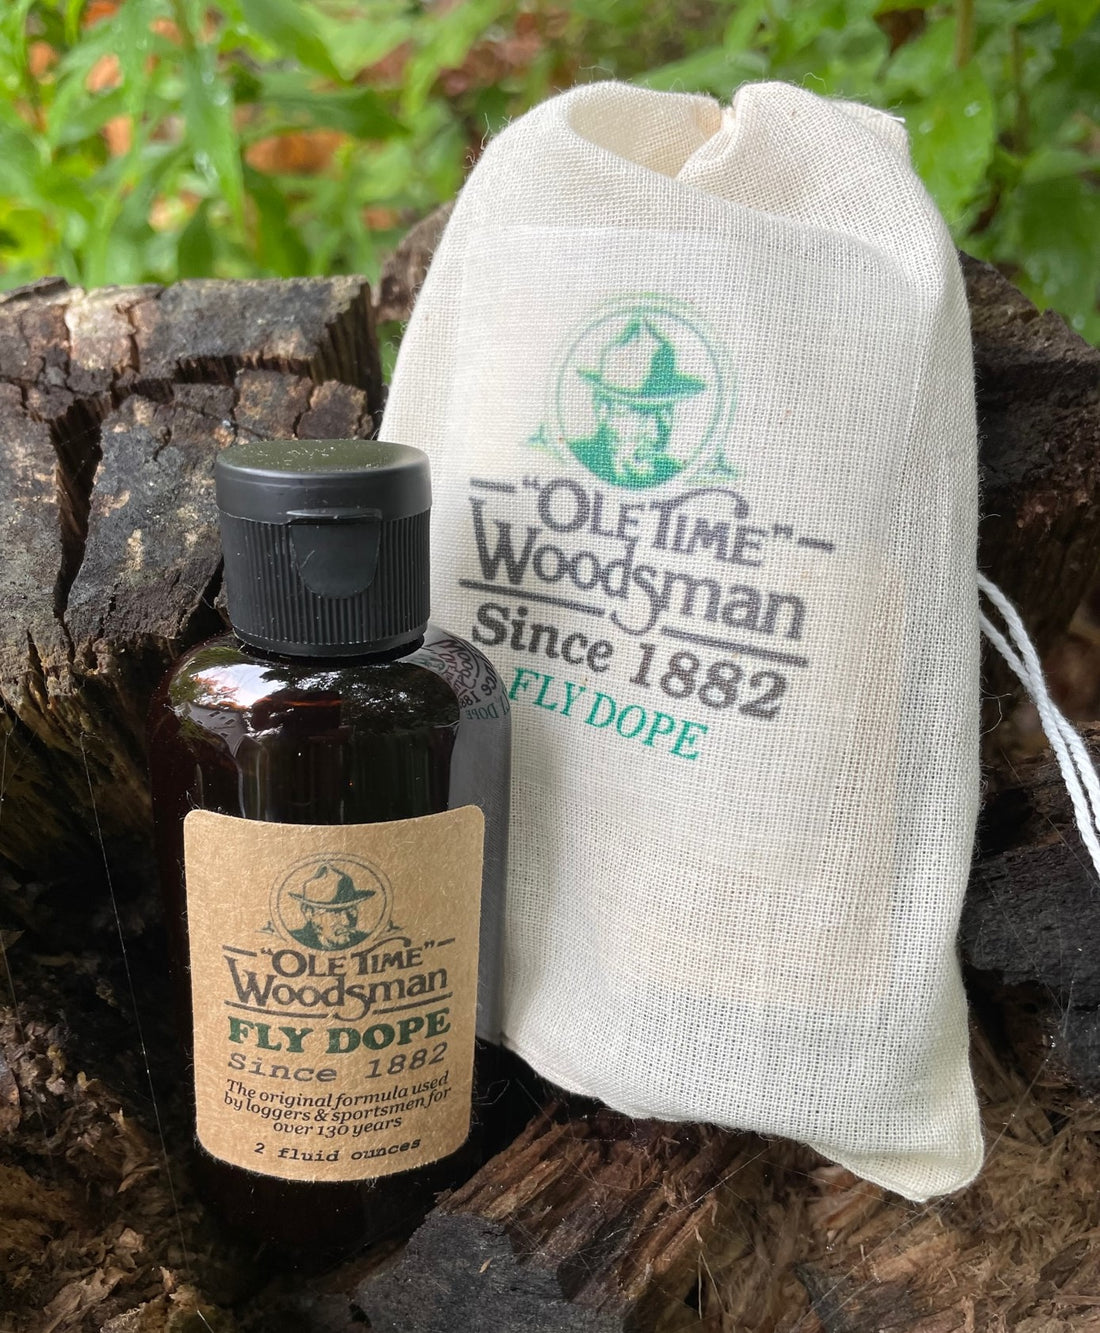 The Use of Insect Repellents Like Ole Time Woodsman Fly Dope Can Interfere with an Insects Sense of Smell.